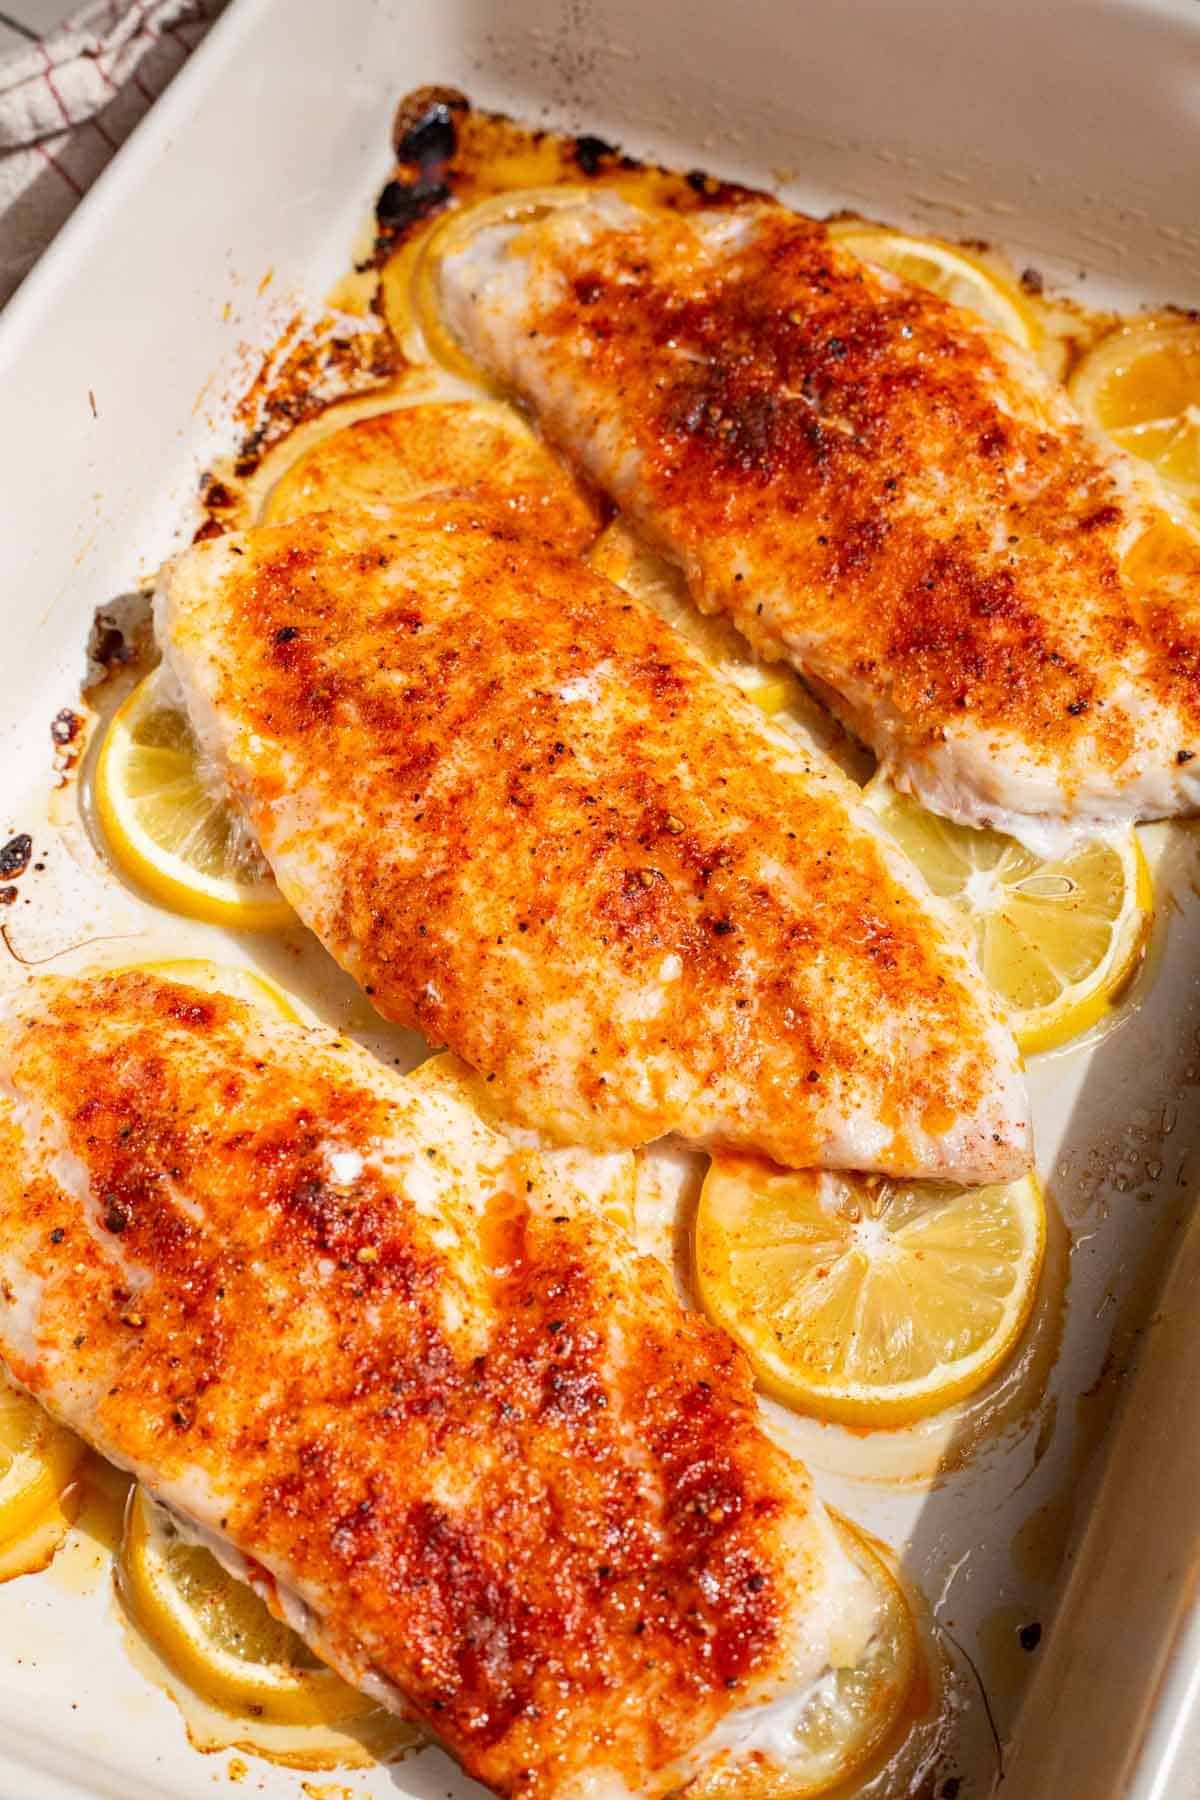 A close up of 3 baked red snapper fillets laying on lemon rounds in a baking dish.